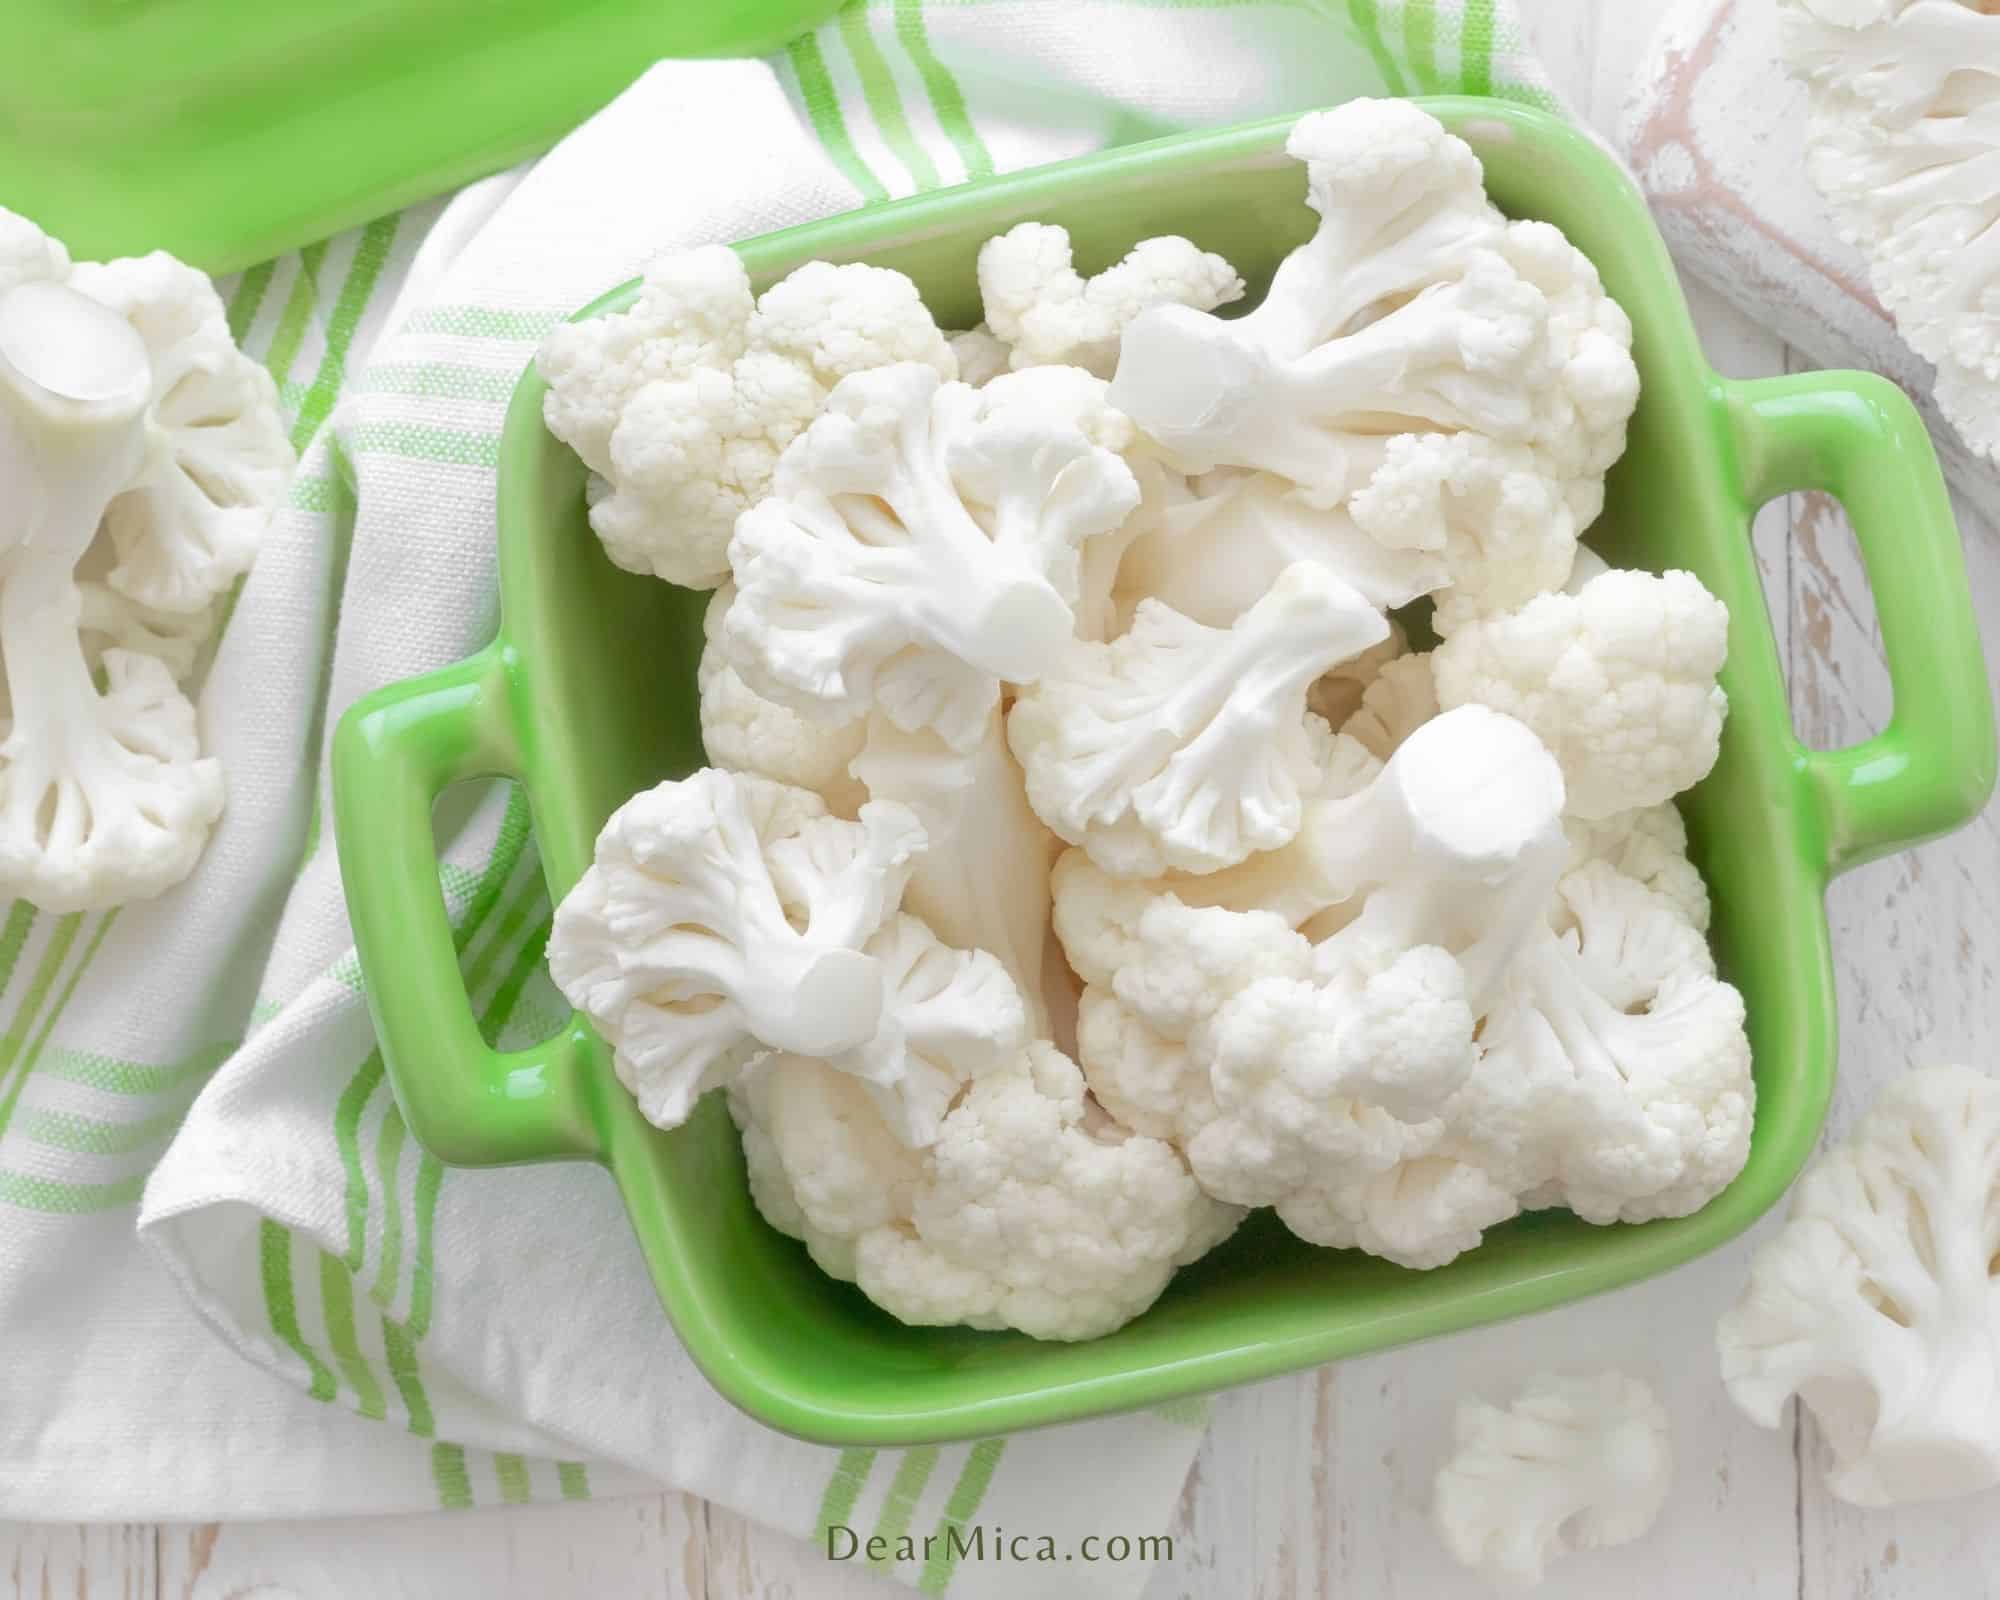 top view of cauliflower florets in a green ceramic container